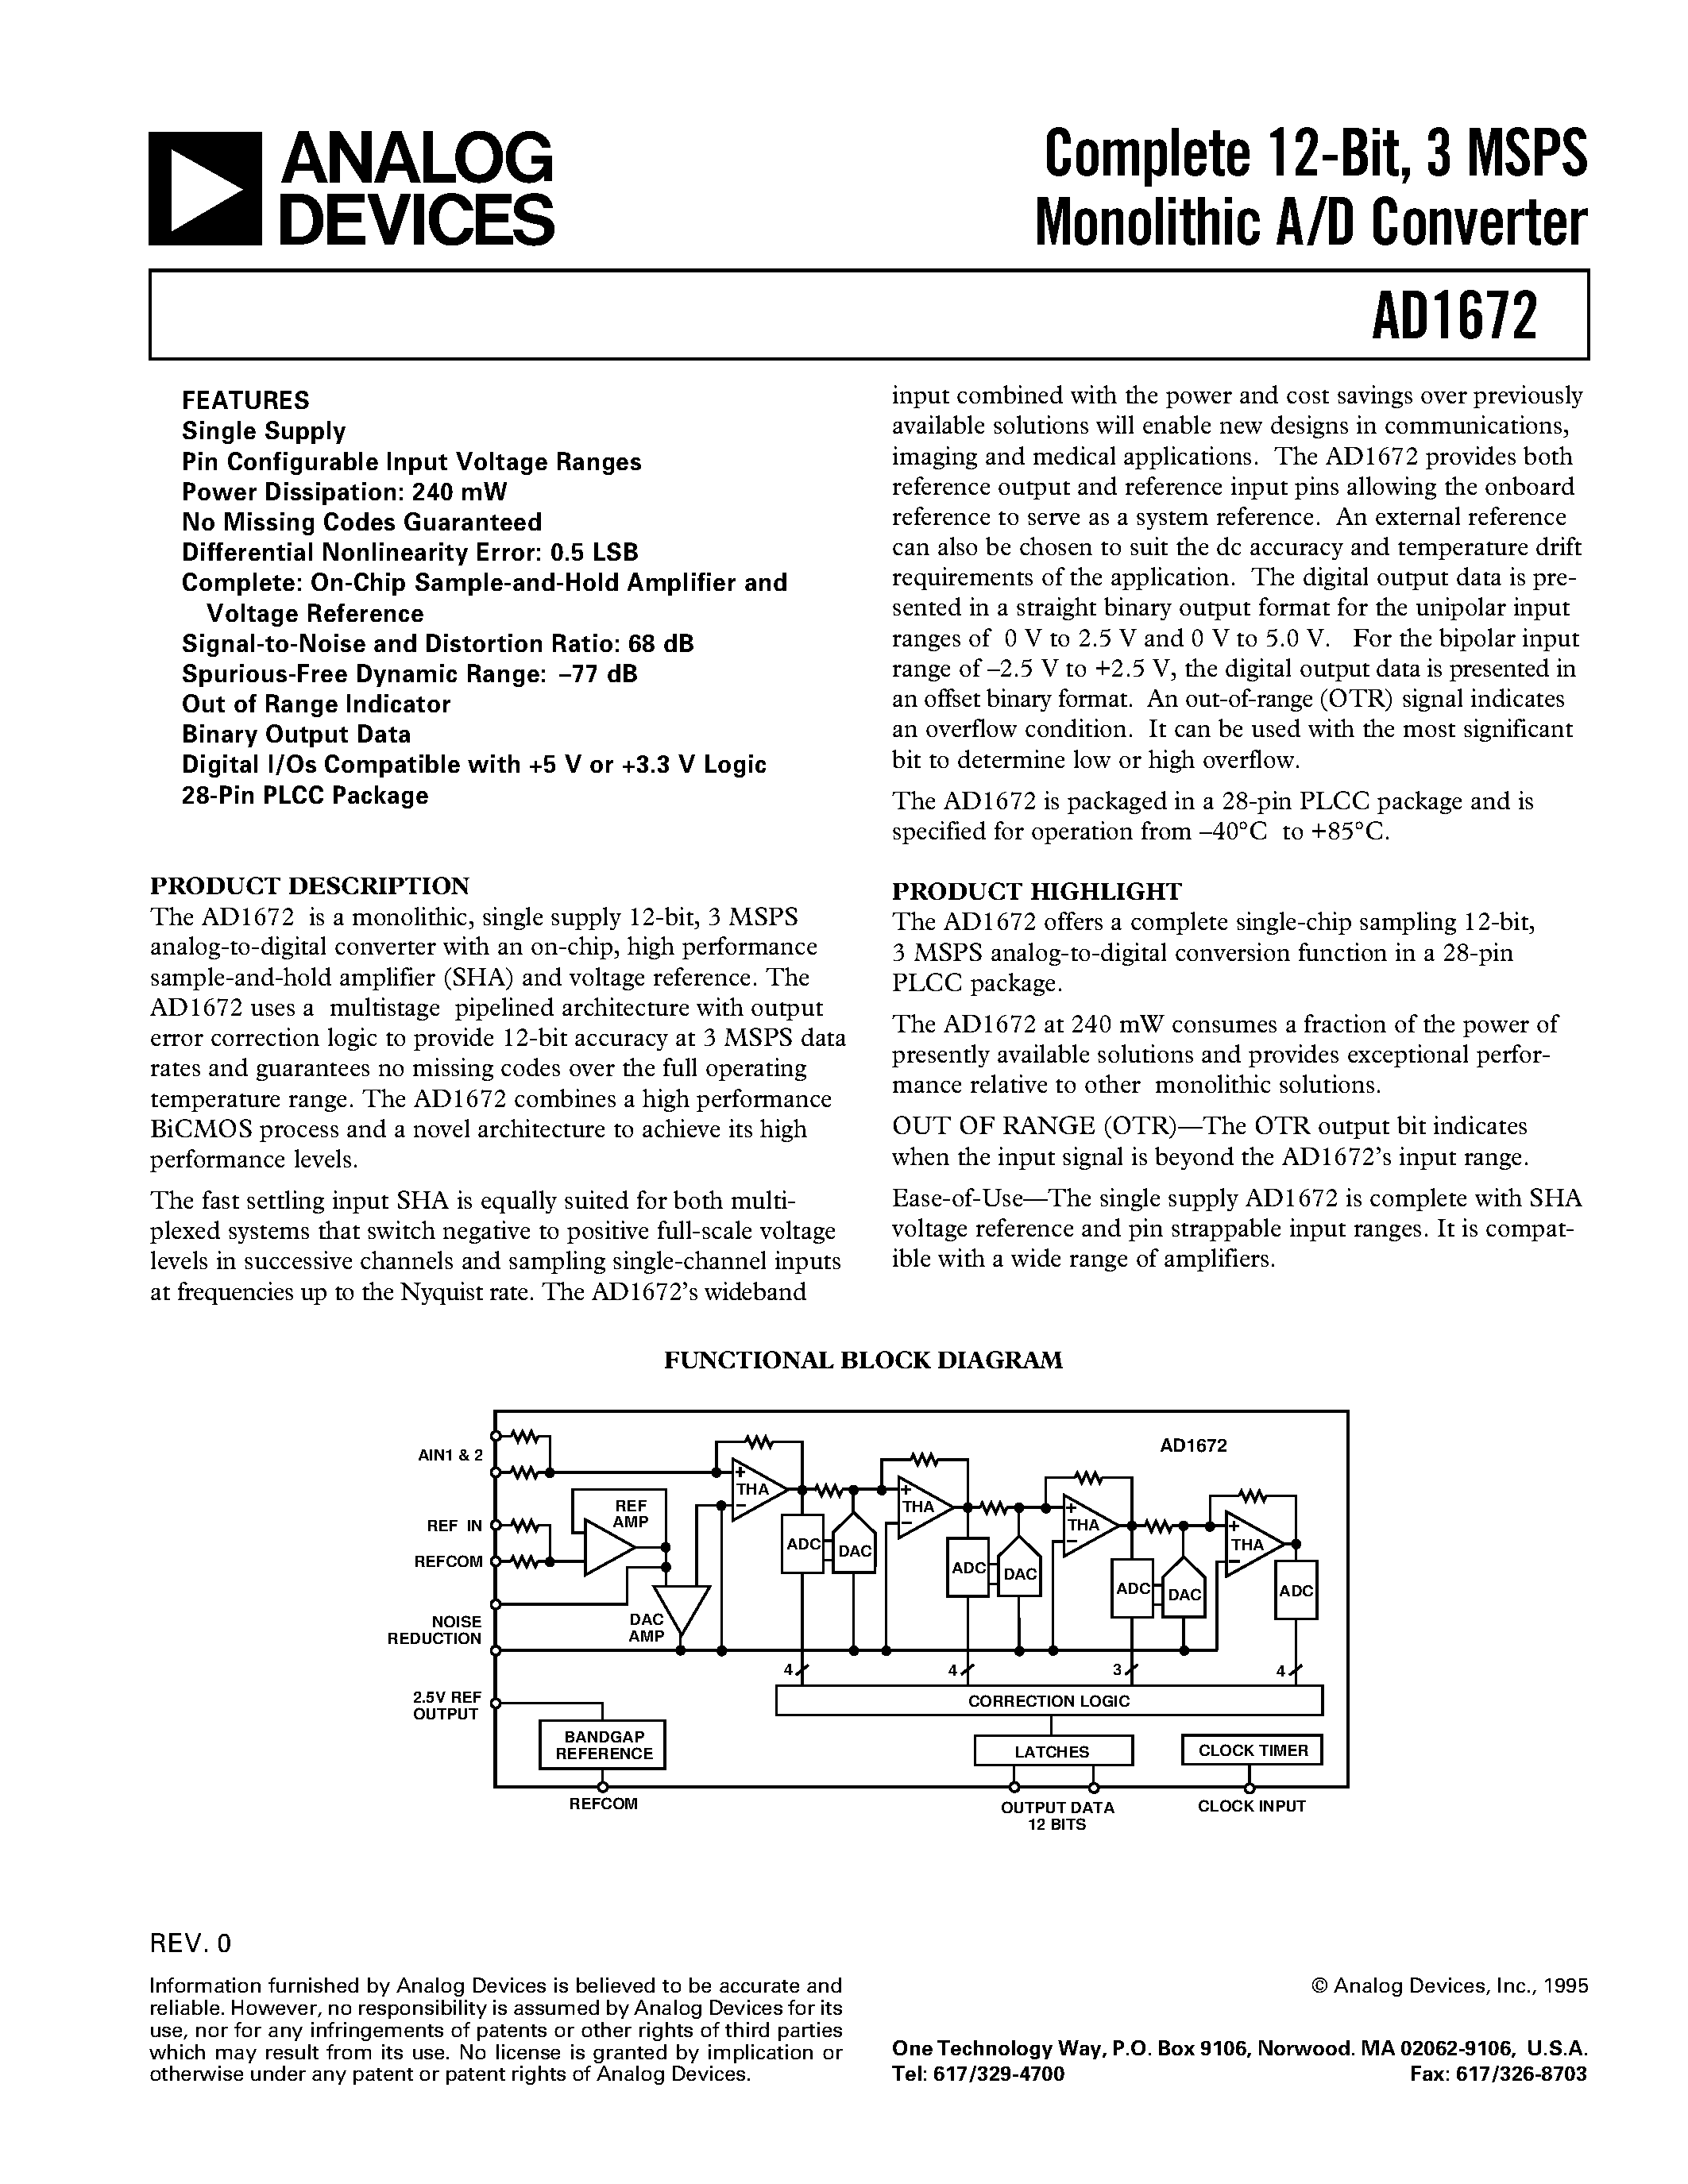 Datasheet AD1672 - Complete 12-Bit/ 3 MSPS Monolithic A/D Converter page 1